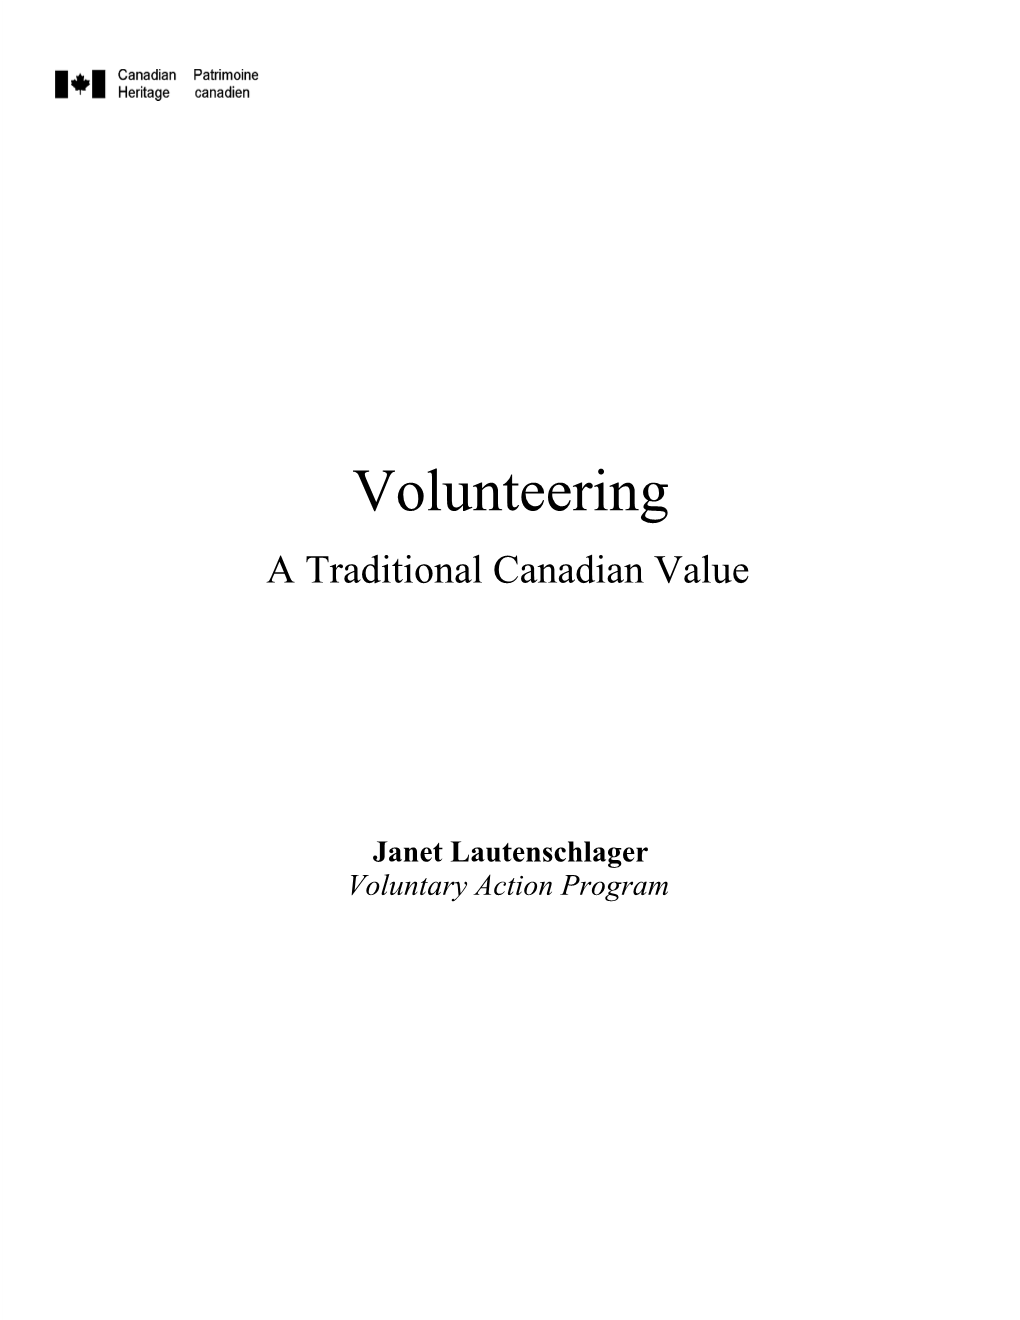 Volunteering: a Traditional Canadian Value